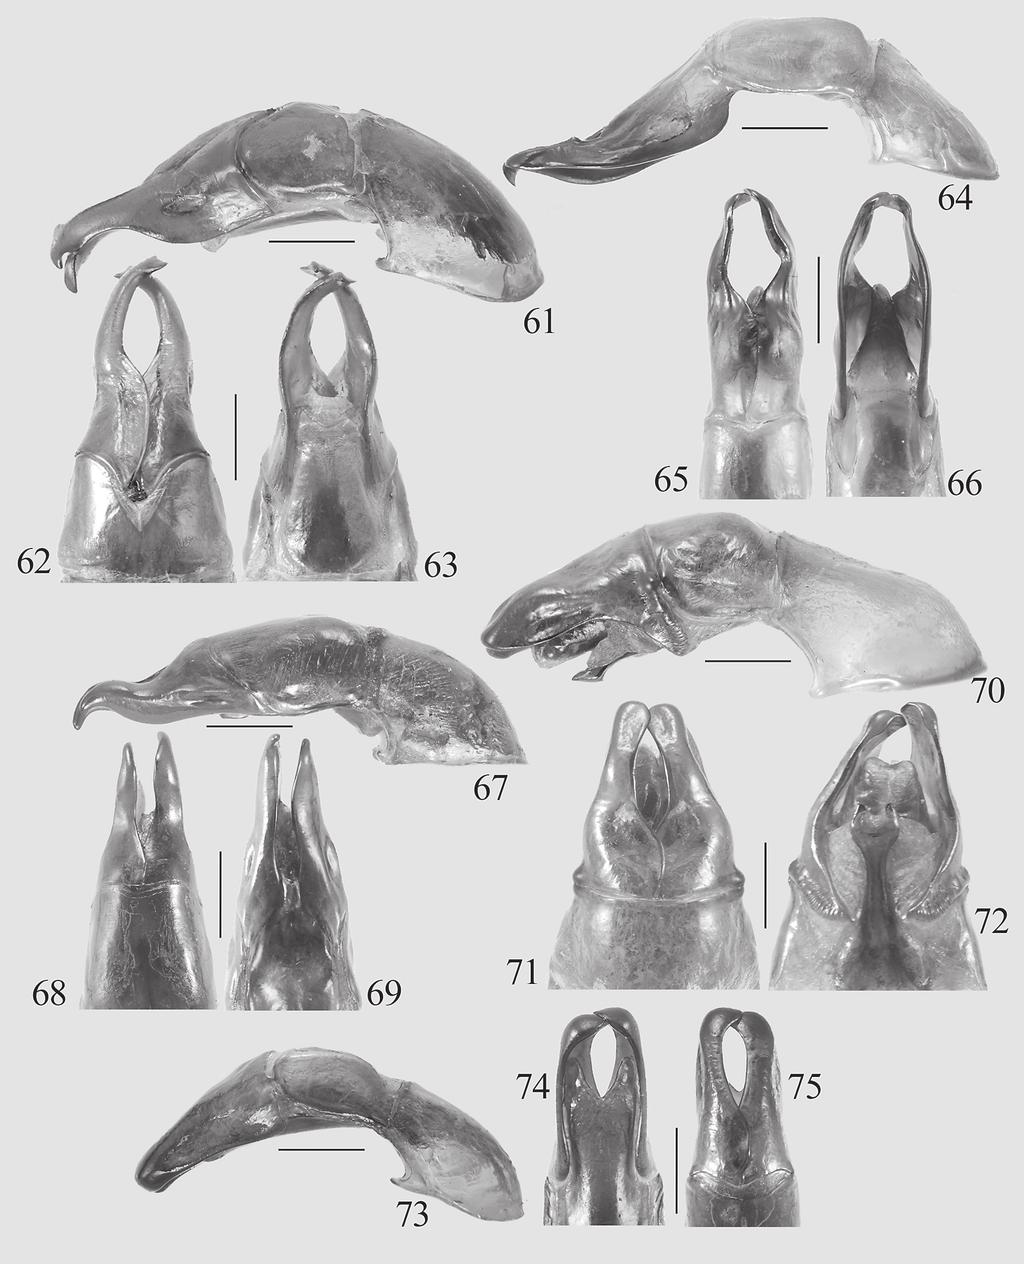 Prokofiev, A. M. & Zorn, C.: Review of the Mimela species of the Dalat Plateau in southern Vietnam Figs 61 75: Mimela spp., aedeagi. 61 63: M. plicatulla, China: Yunnan, Xishuanbanna (61 lateral view.